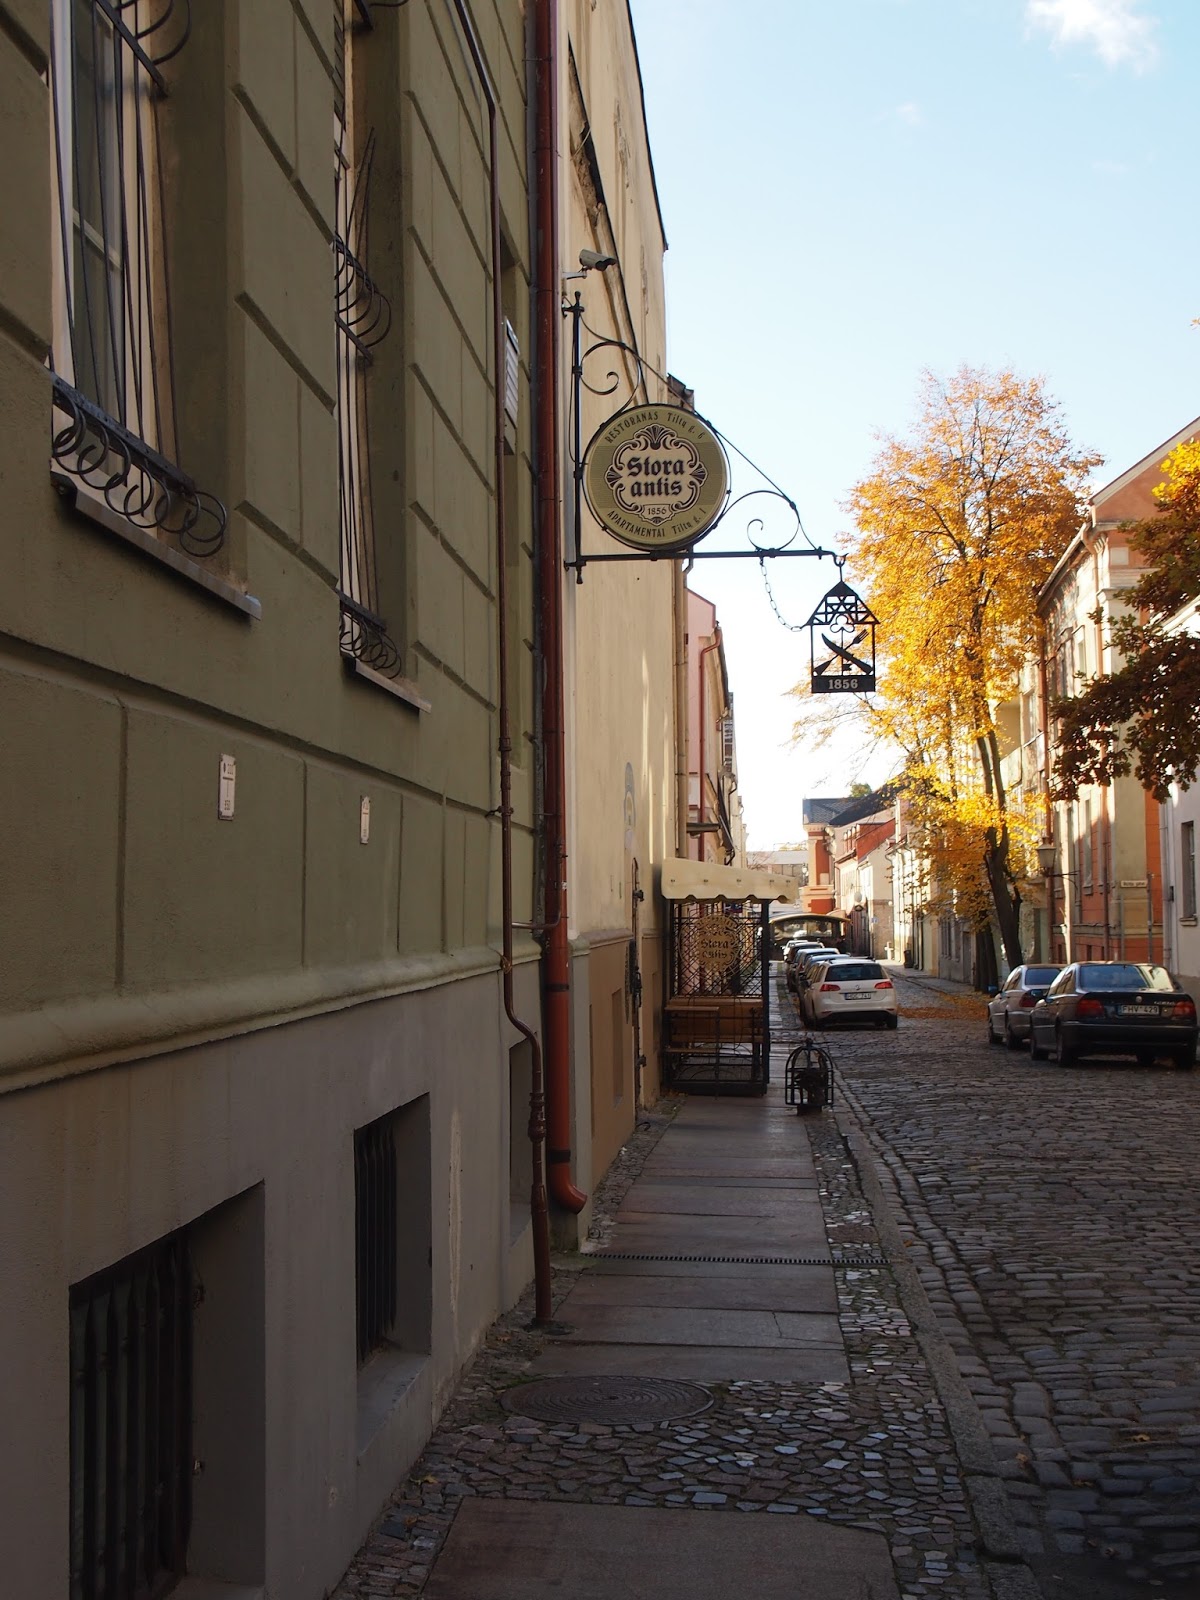 In Search Of: Where To Eat in Klaipeda, Lithuania